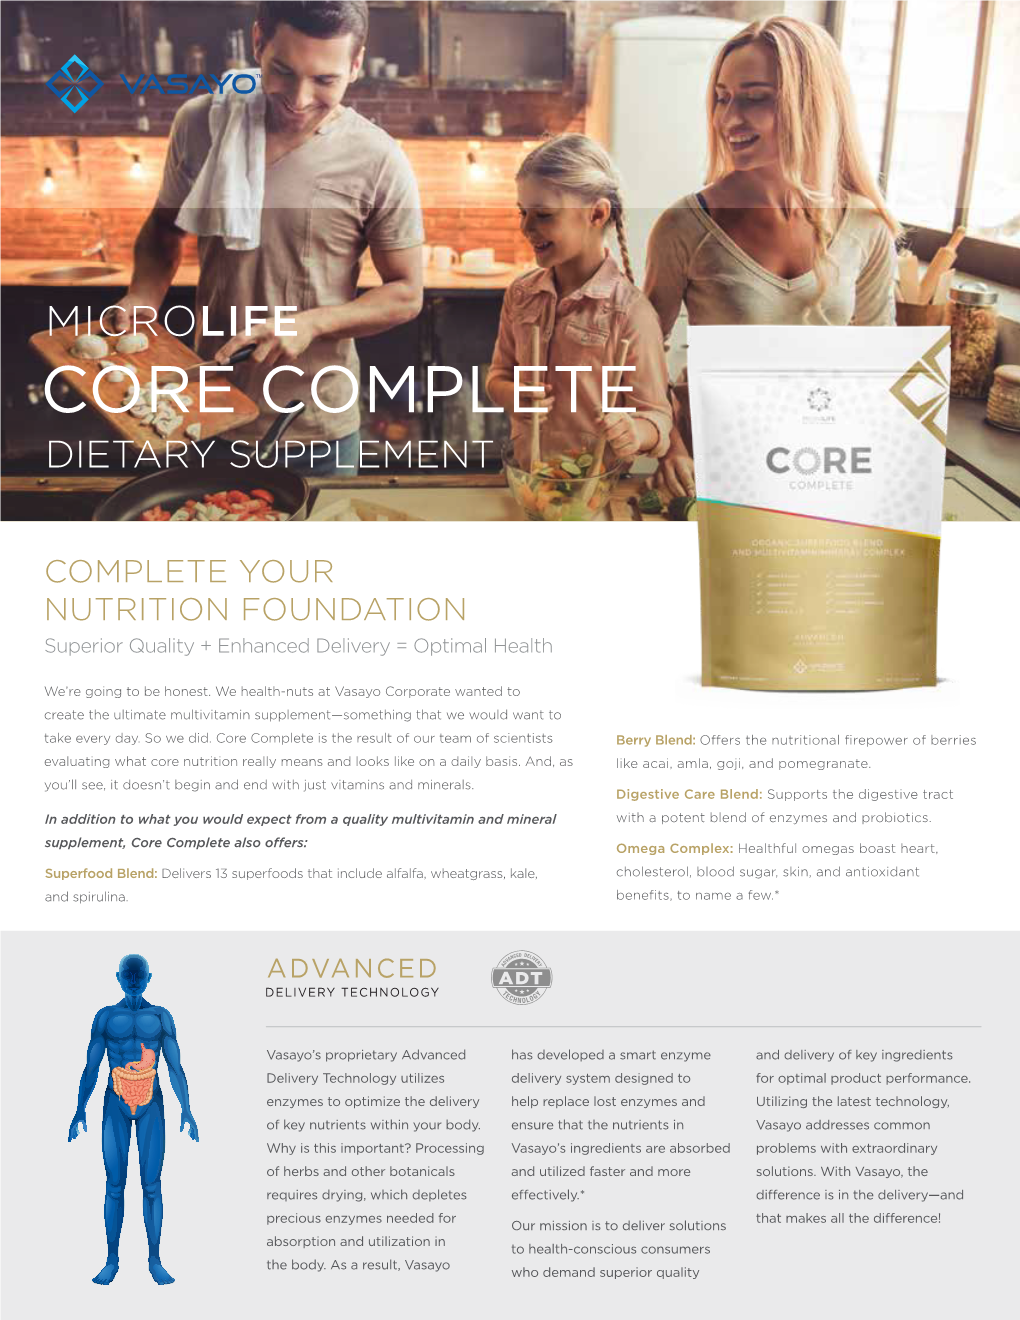 Core Complete Dietary Supplement